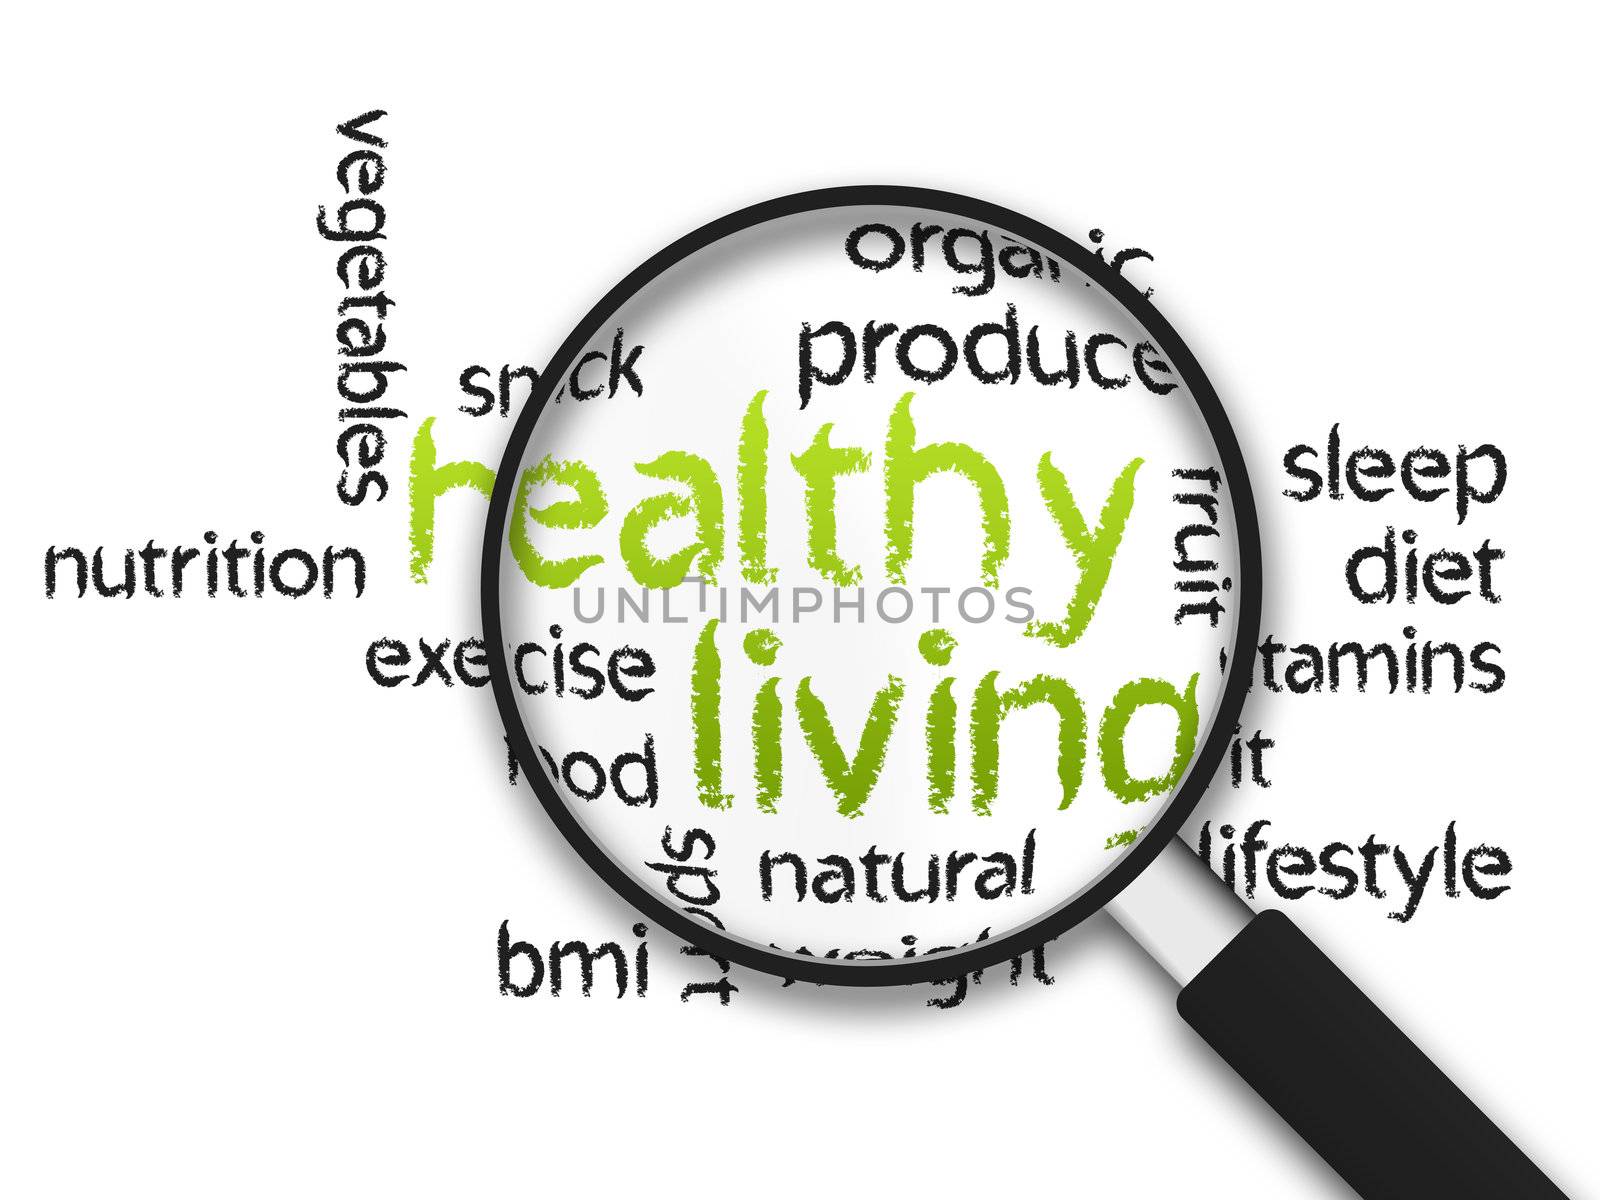 Magnified Healthy Living word illustration on white background.